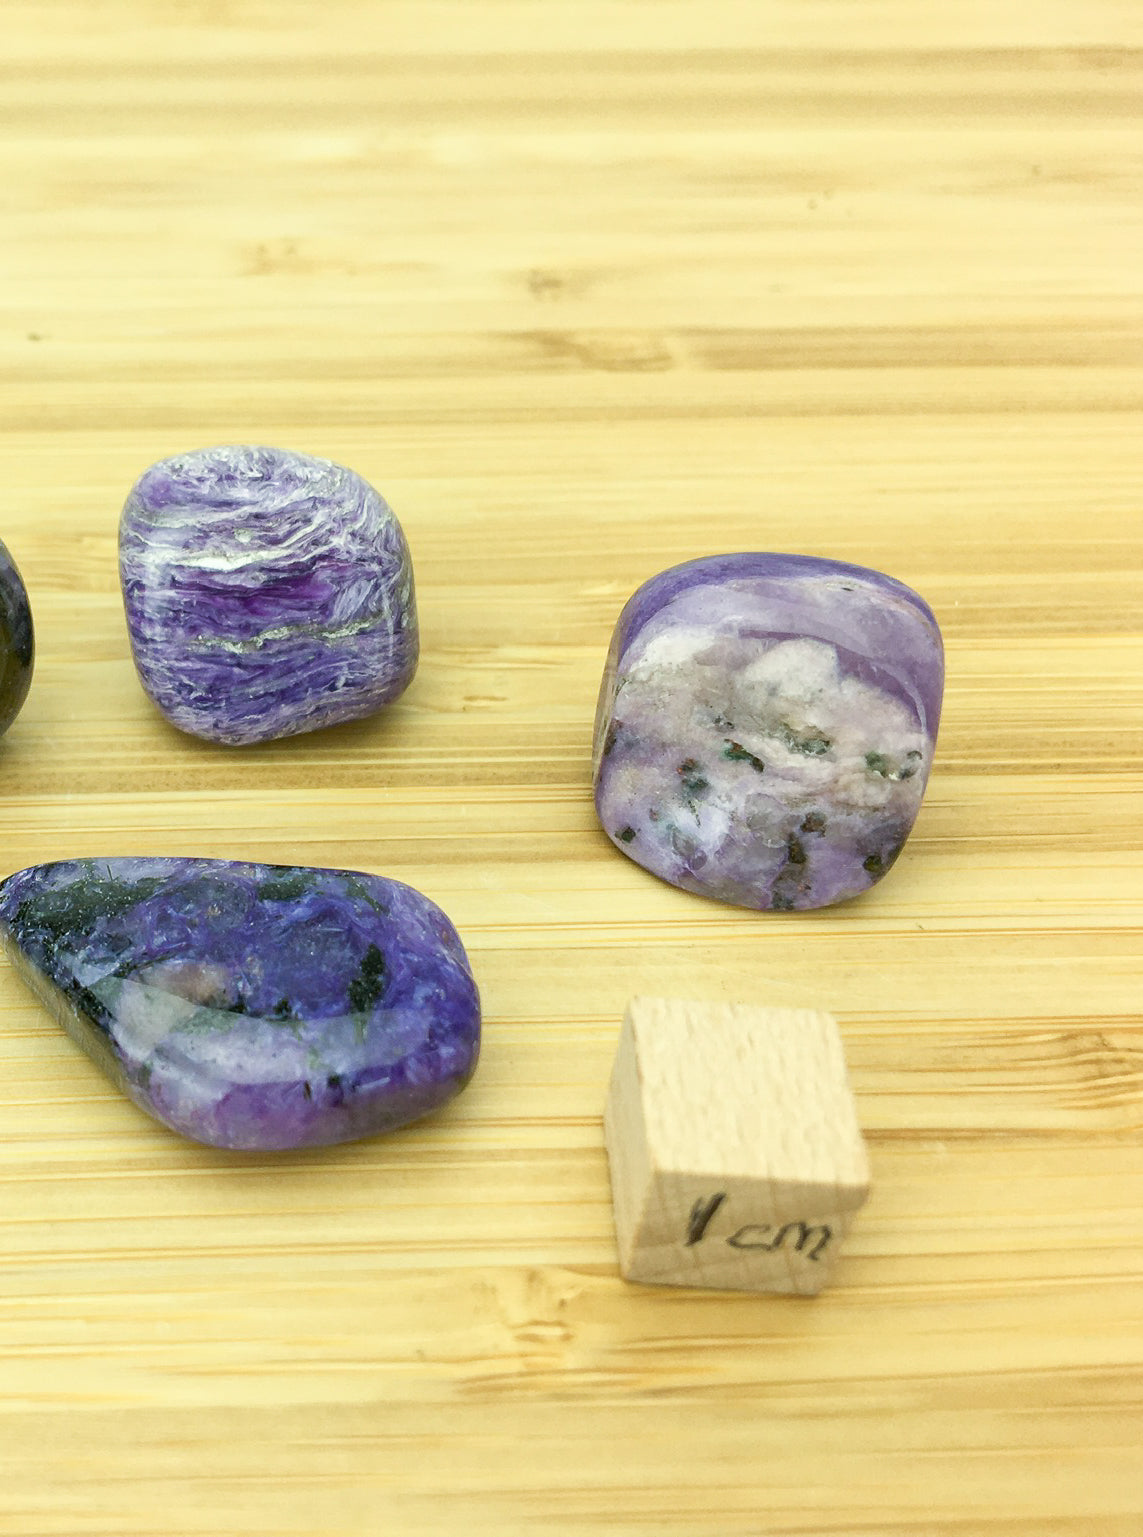 three chariot tumble stones. They are a rich purple with some white banding. A 1cm cube is in the ophotgraoh for scale. The samples are about 1cm each.